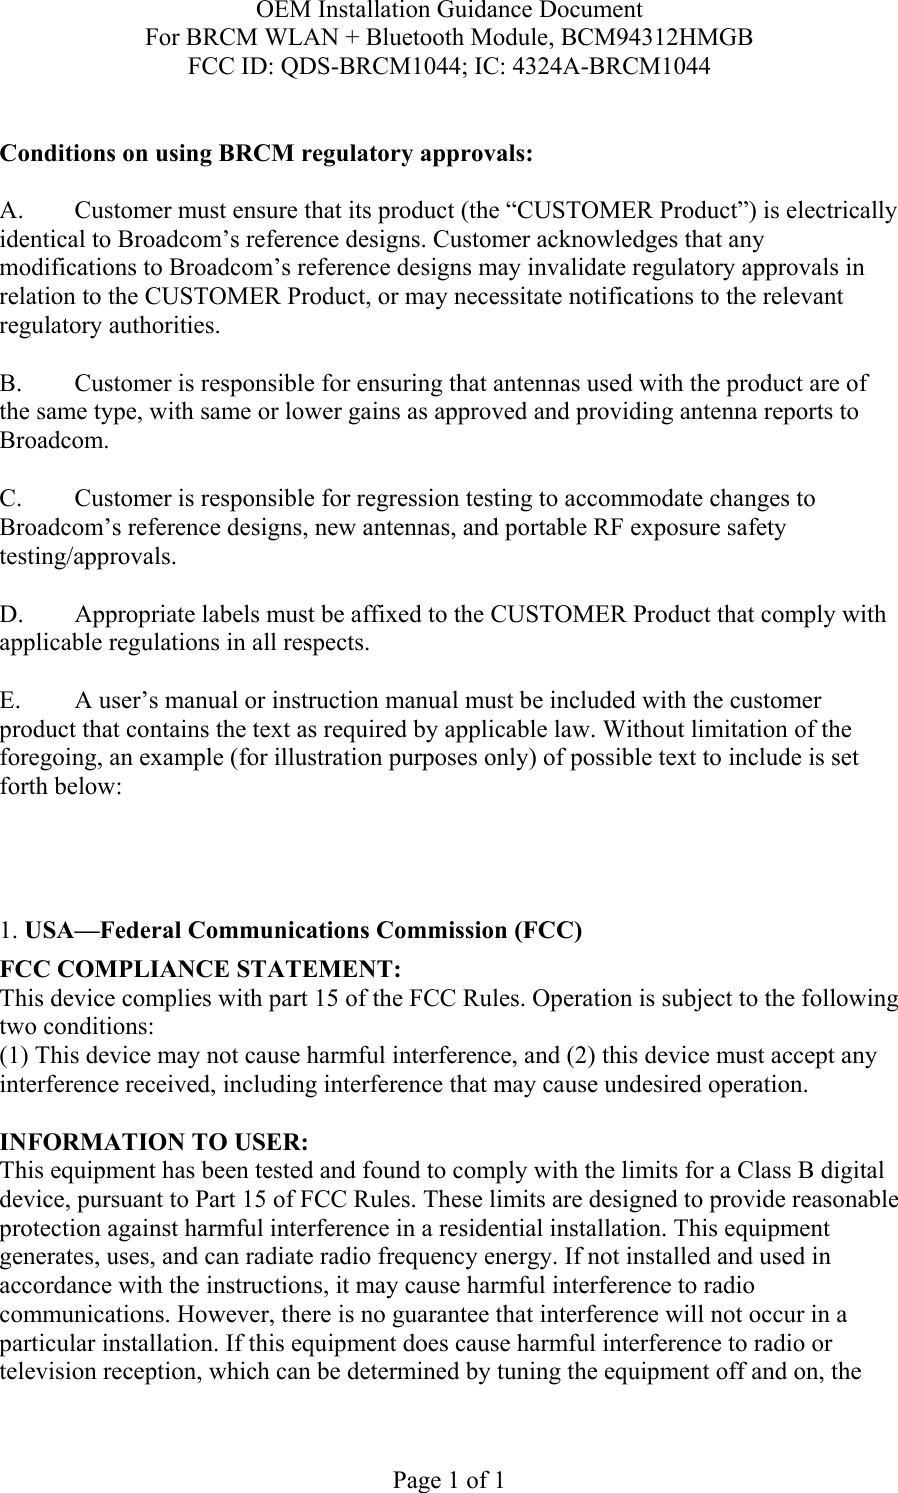 OEM Installation Guidance Document For BRCM WLAN + Bluetooth Module, BCM94312HMGB FCC ID: QDS-BRCM1044; IC: 4324A-BRCM1044  Page 1 of 1  Conditions on using BRCM regulatory approvals:   A.  Customer must ensure that its product (the “CUSTOMER Product”) is electrically identical to Broadcom’s reference designs. Customer acknowledges that any modifications to Broadcom’s reference designs may invalidate regulatory approvals in relation to the CUSTOMER Product, or may necessitate notifications to the relevant regulatory authorities.  B.   Customer is responsible for ensuring that antennas used with the product are of the same type, with same or lower gains as approved and providing antenna reports to Broadcom.  C.   Customer is responsible for regression testing to accommodate changes to Broadcom’s reference designs, new antennas, and portable RF exposure safety testing/approvals.  D.  Appropriate labels must be affixed to the CUSTOMER Product that comply with applicable regulations in all respects.    E.  A user’s manual or instruction manual must be included with the customer product that contains the text as required by applicable law. Without limitation of the foregoing, an example (for illustration purposes only) of possible text to include is set forth below:      1. USA—Federal Communications Commission (FCC) FCC COMPLIANCE STATEMENT: This device complies with part 15 of the FCC Rules. Operation is subject to the following two conditions: (1) This device may not cause harmful interference, and (2) this device must accept any interference received, including interference that may cause undesired operation.  INFORMATION TO USER: This equipment has been tested and found to comply with the limits for a Class B digital device, pursuant to Part 15 of FCC Rules. These limits are designed to provide reasonable protection against harmful interference in a residential installation. This equipment generates, uses, and can radiate radio frequency energy. If not installed and used in accordance with the instructions, it may cause harmful interference to radio communications. However, there is no guarantee that interference will not occur in a particular installation. If this equipment does cause harmful interference to radio or television reception, which can be determined by tuning the equipment off and on, the 